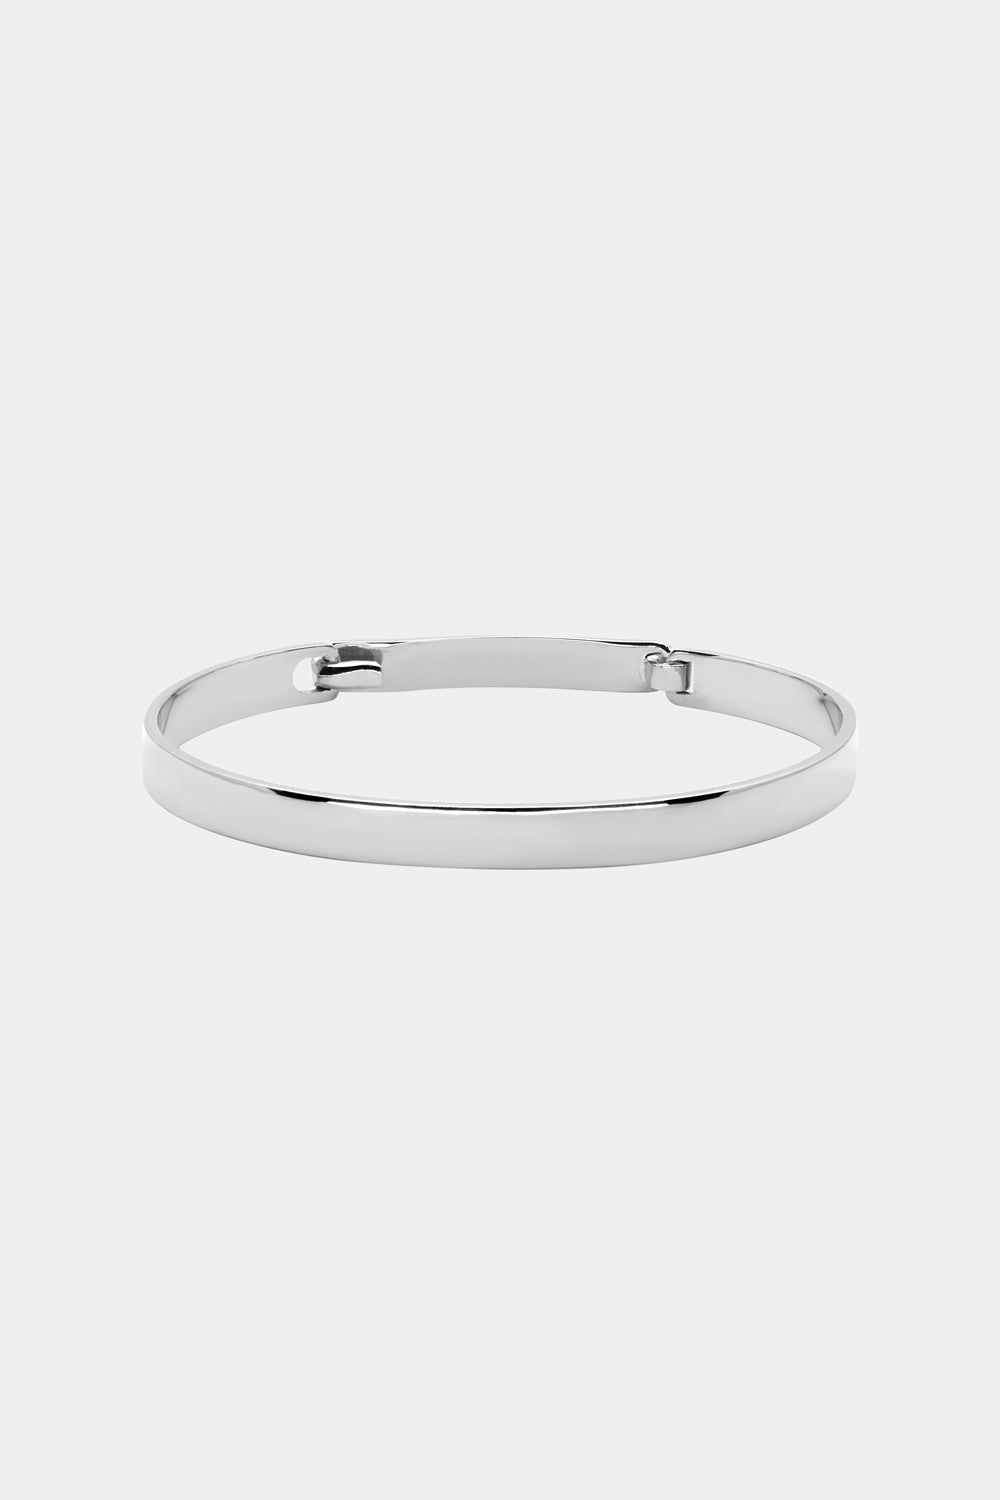 Tallows Bangle | Silver or White Gold, More Options Available